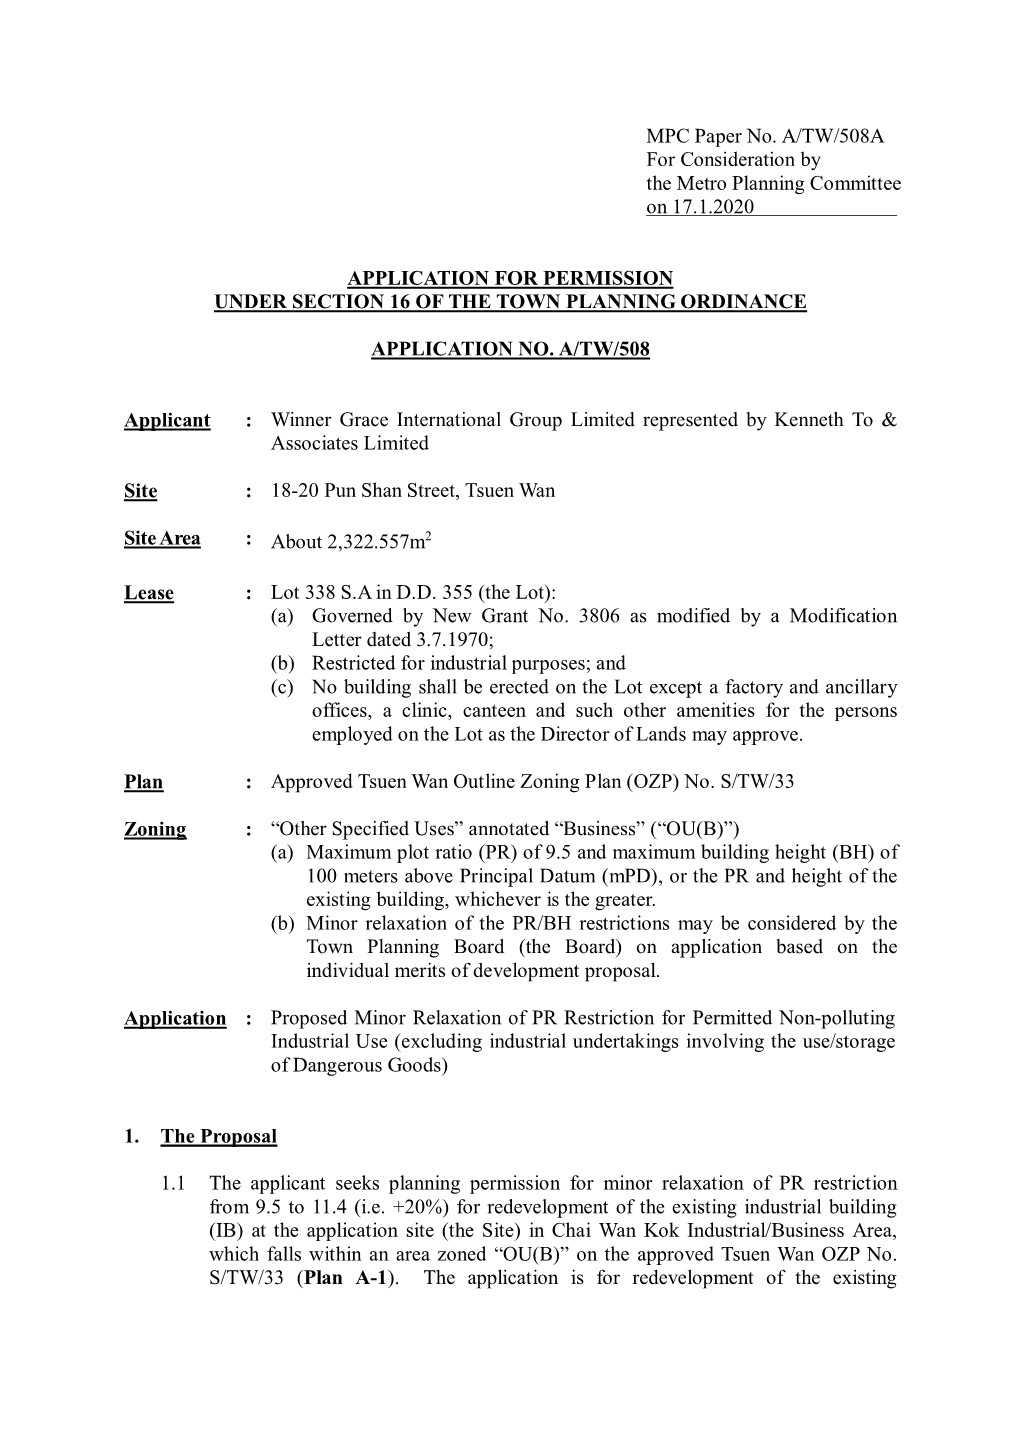 MPC Paper No. A/TW/508A for Consideration by the Metro Planning Committee on 17.1.2020